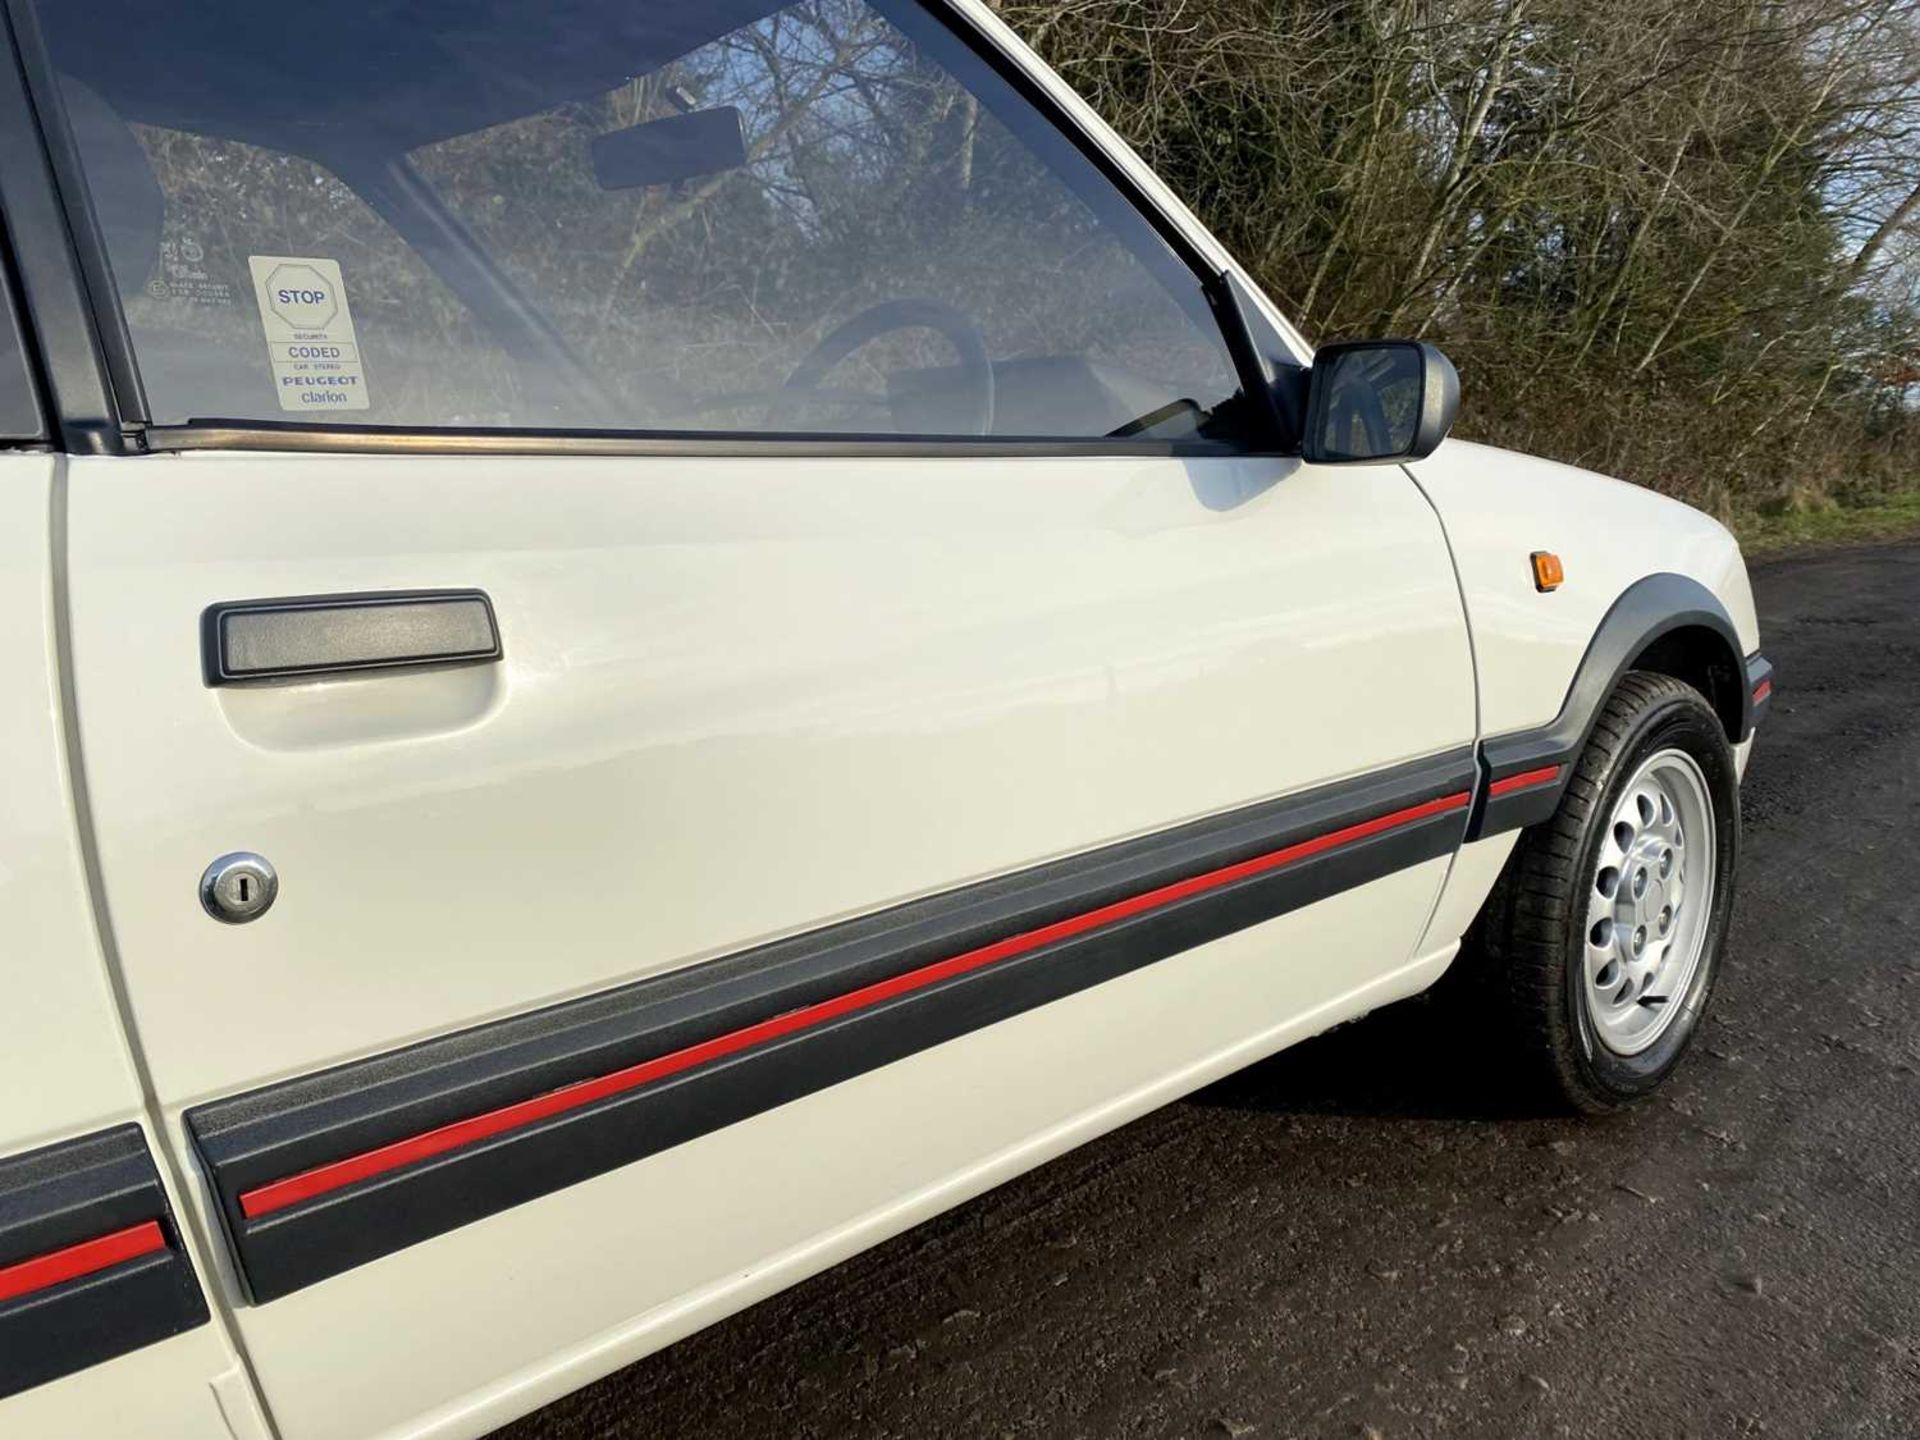 1990 Peugeot 205 GTi 1.6 Only 56,000 miles, same owner for 16 years - Image 69 of 81